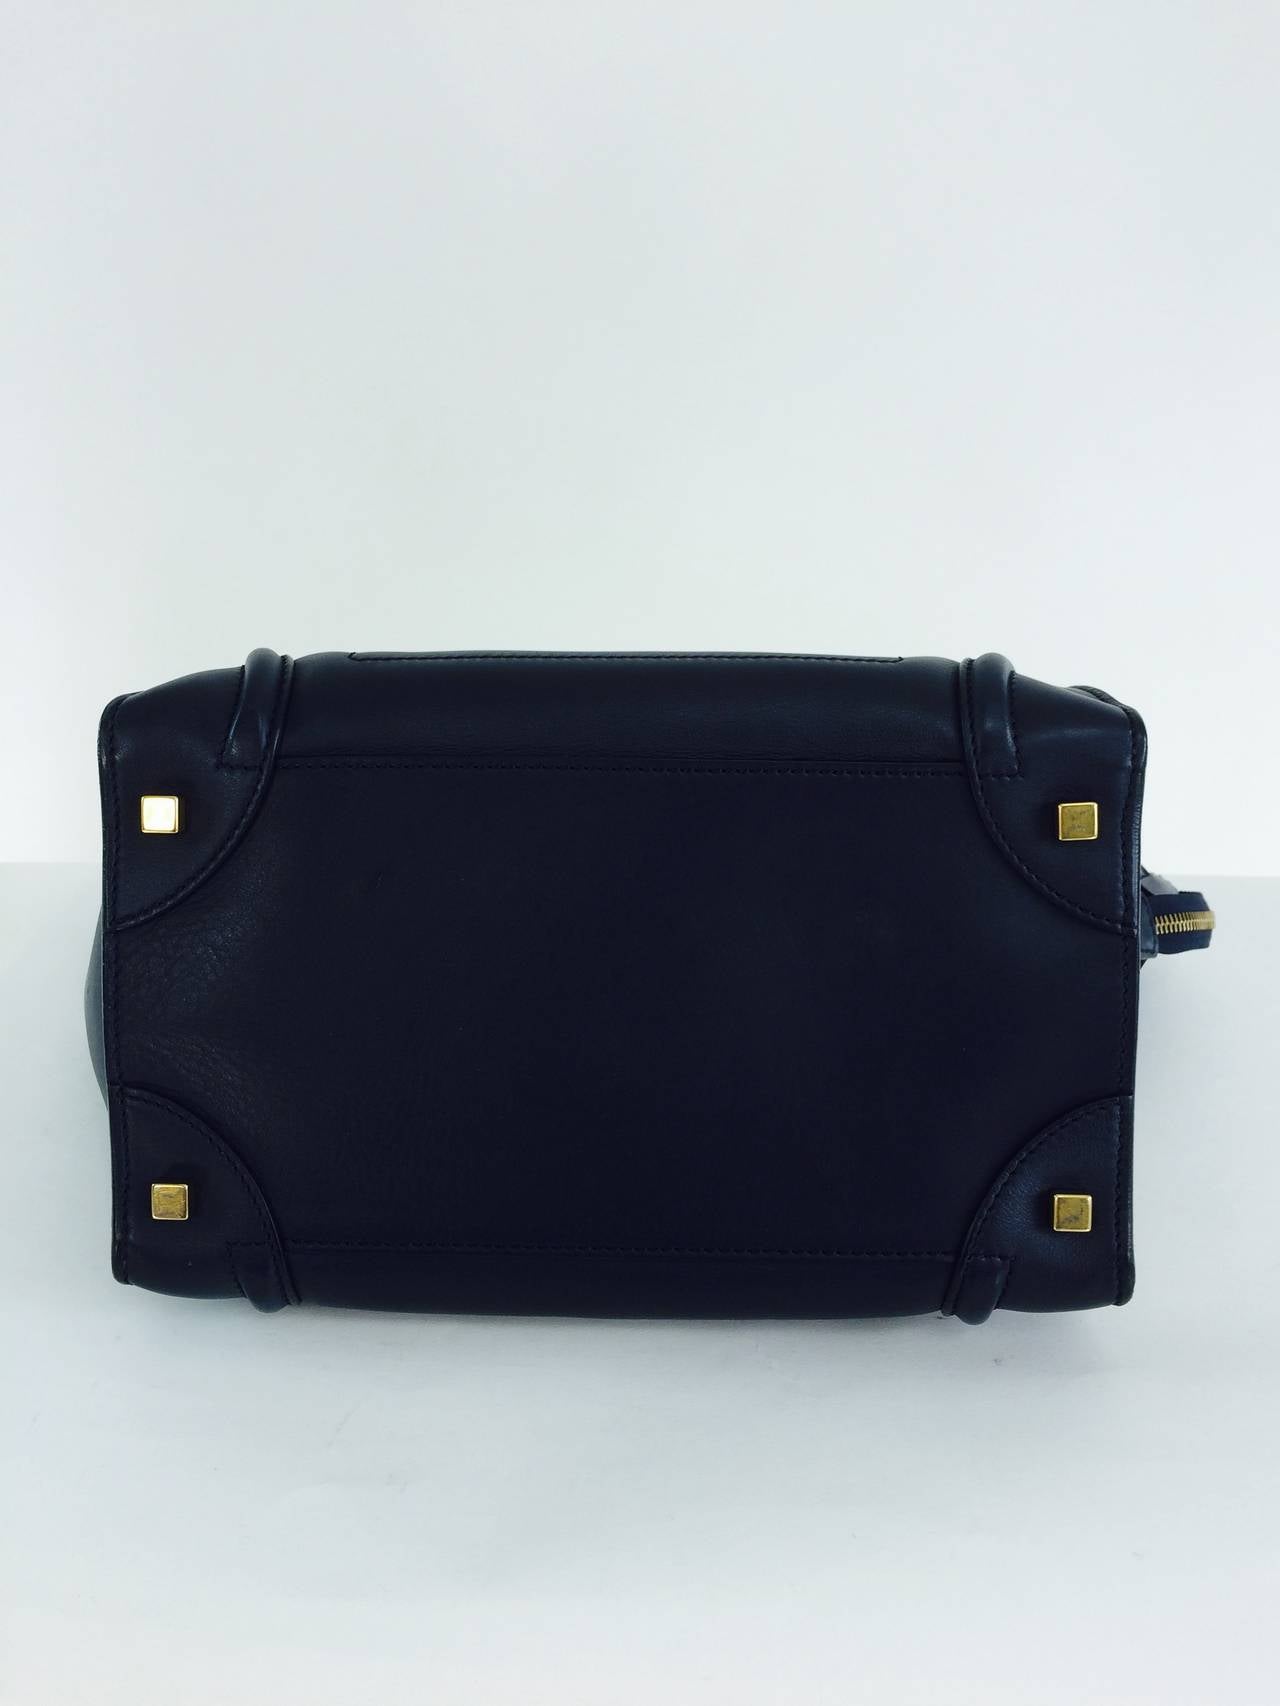 Celine mini luggage tote in navy blue smooth leather 1